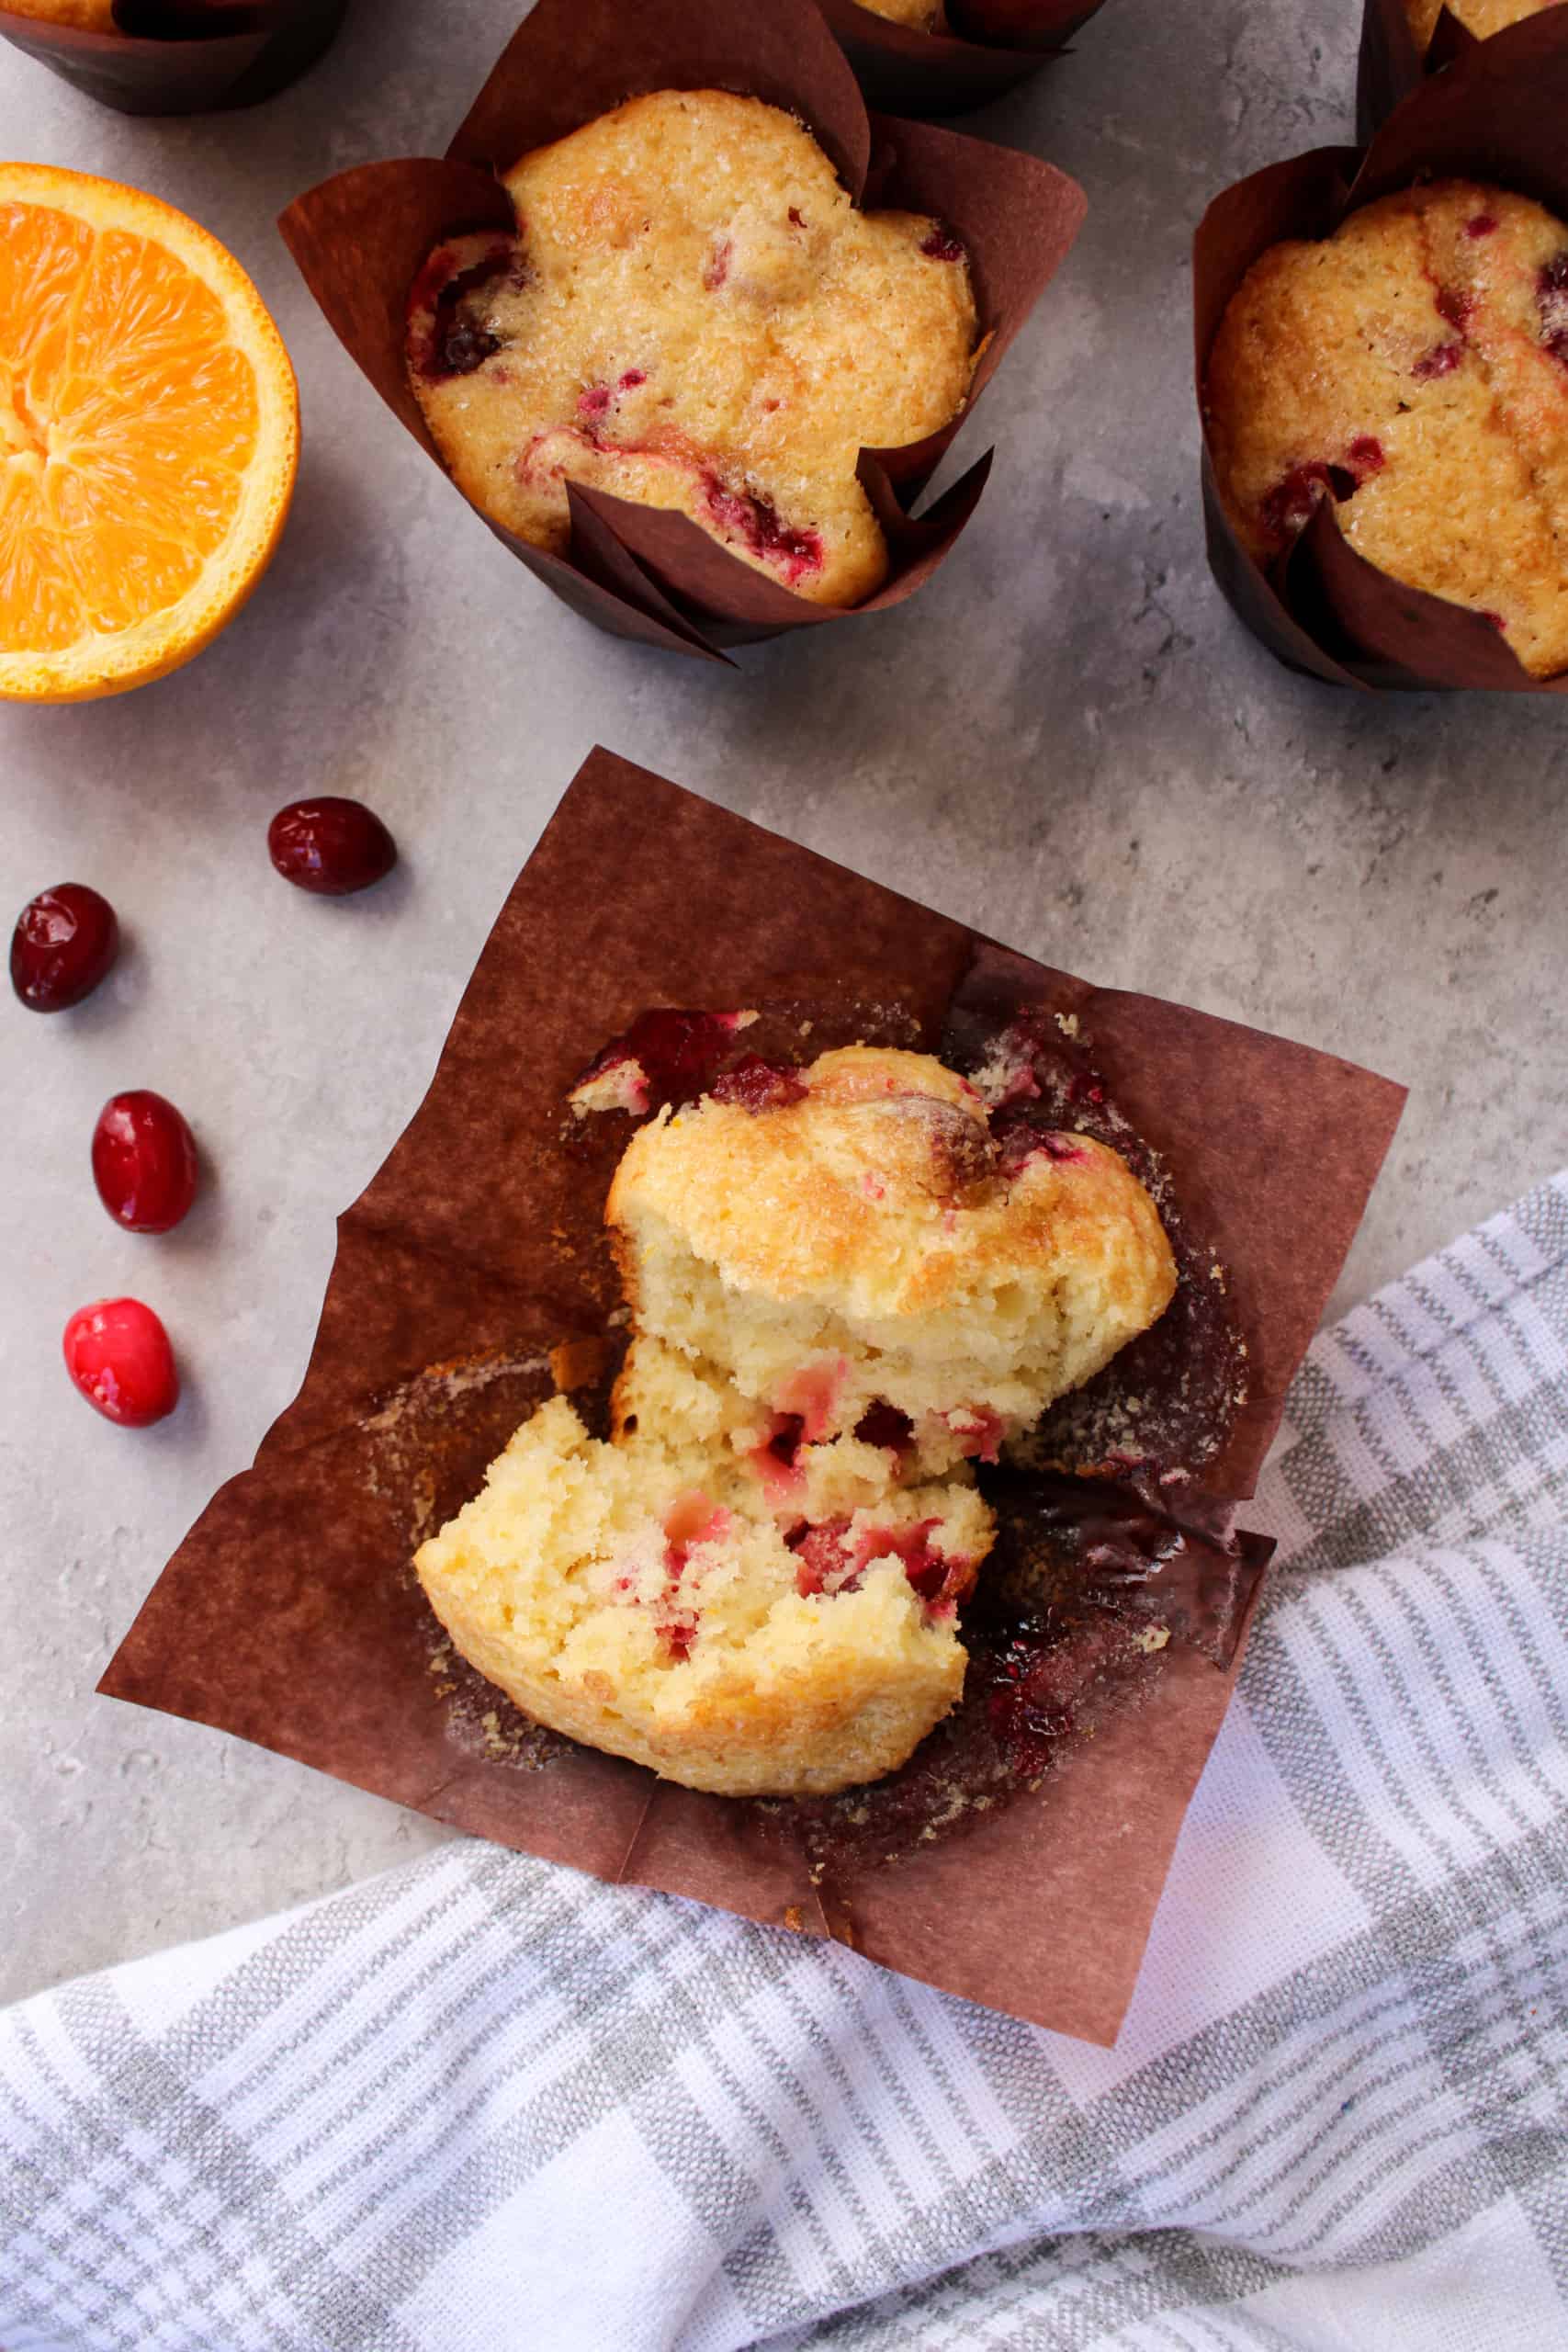 Orange cranberry muffin sliced in half on a table.